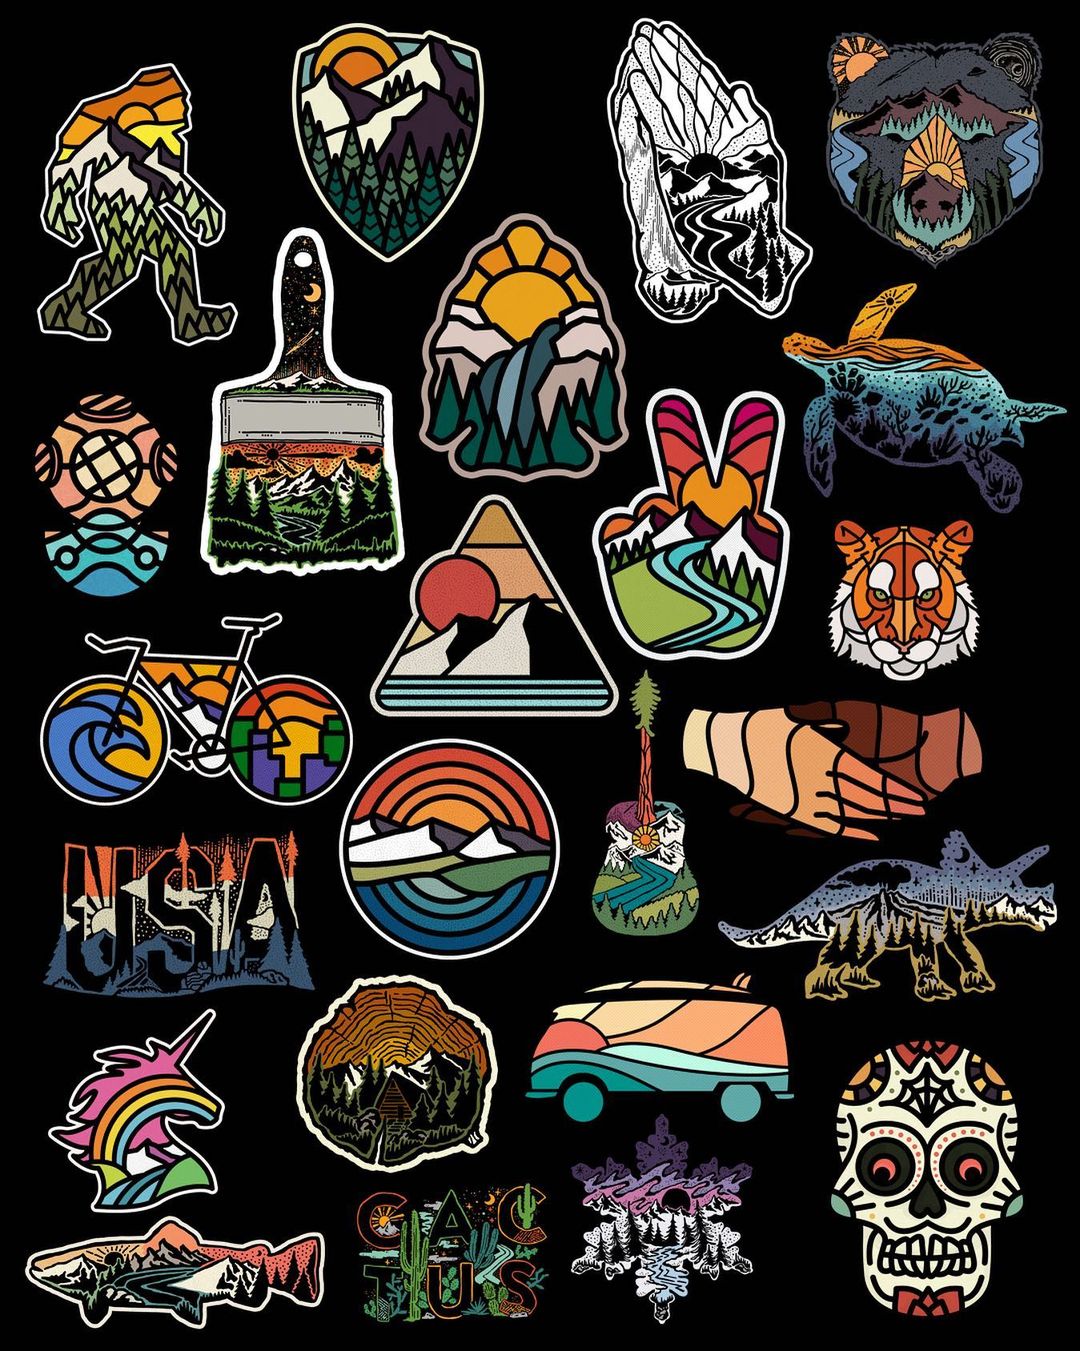 Love Stickers? We've Got You!